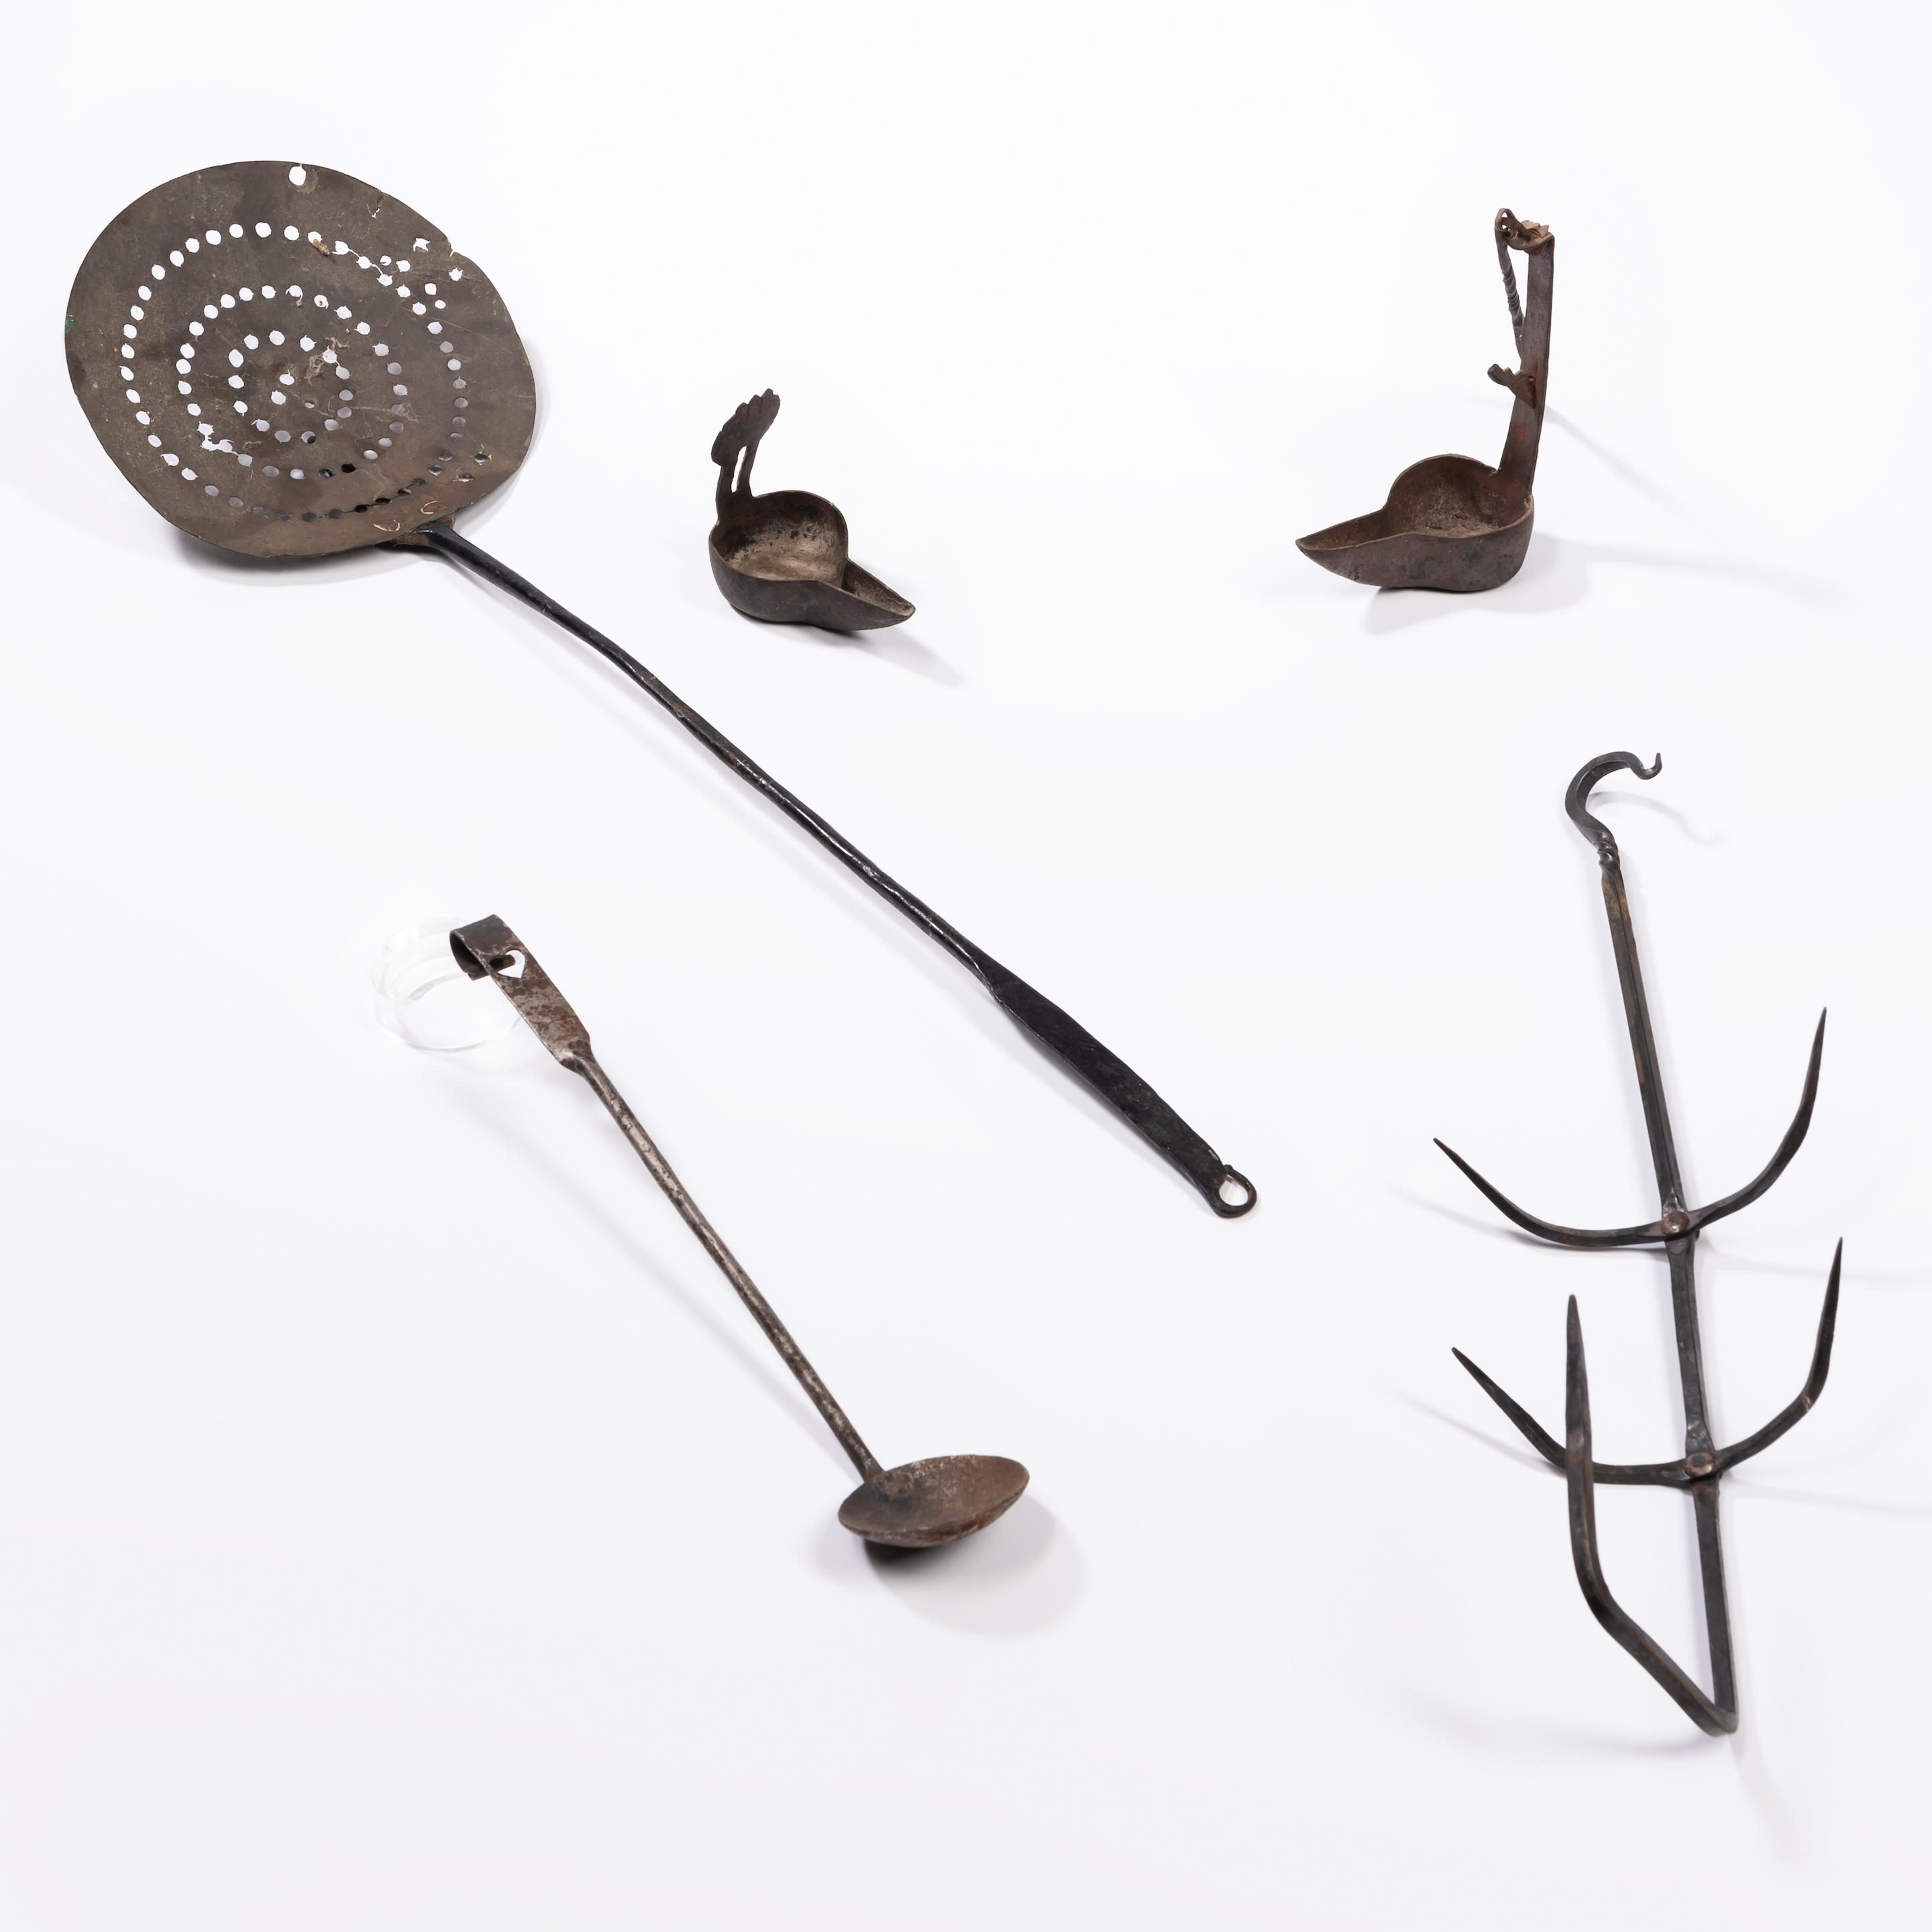 FIVE WROUGHT IRON IMPLEMENTS including